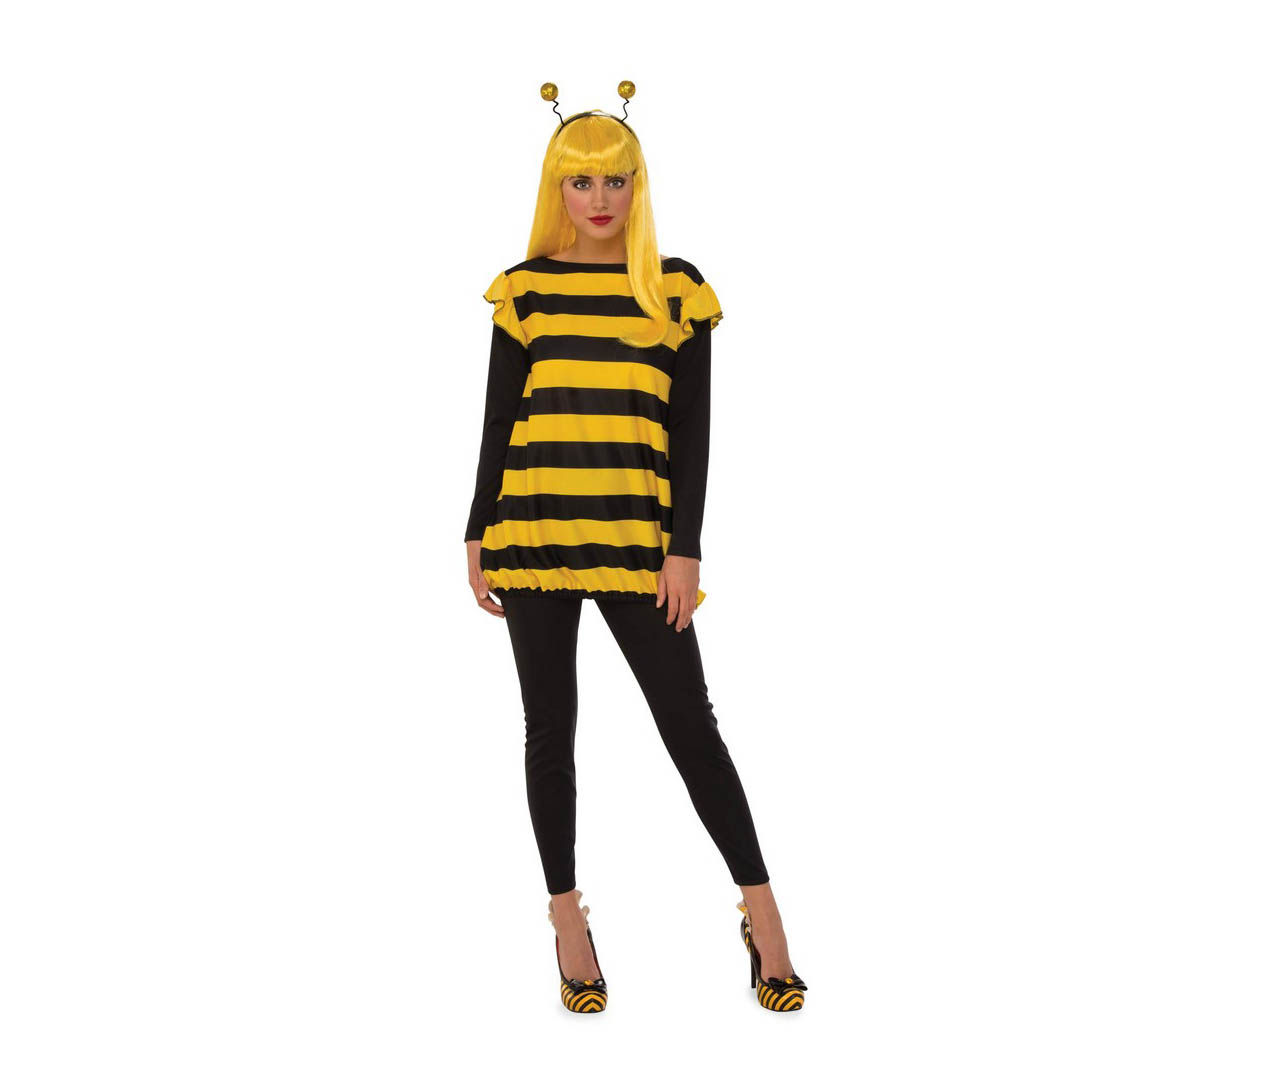 Adult Size S Bumble Bee Costume